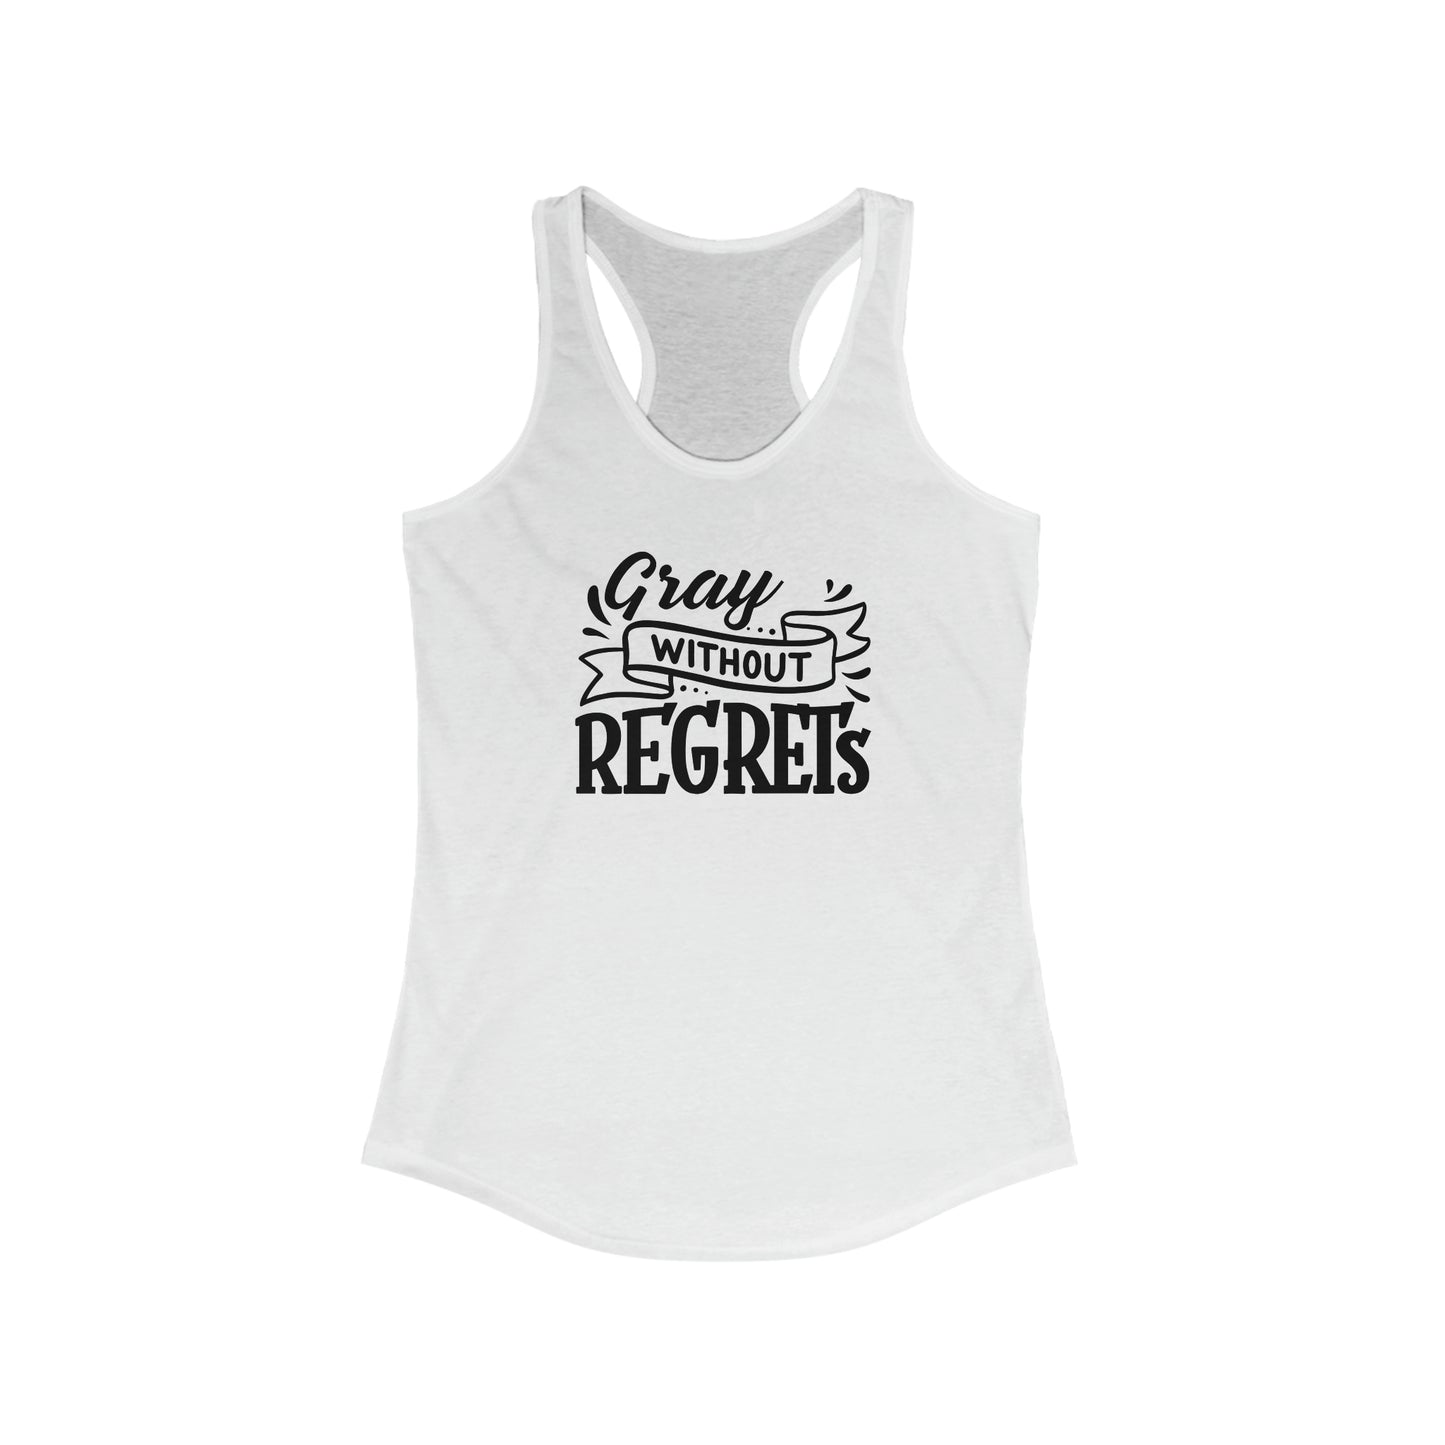 Gray Without Regrets. Women's Ideal Racerback Tank